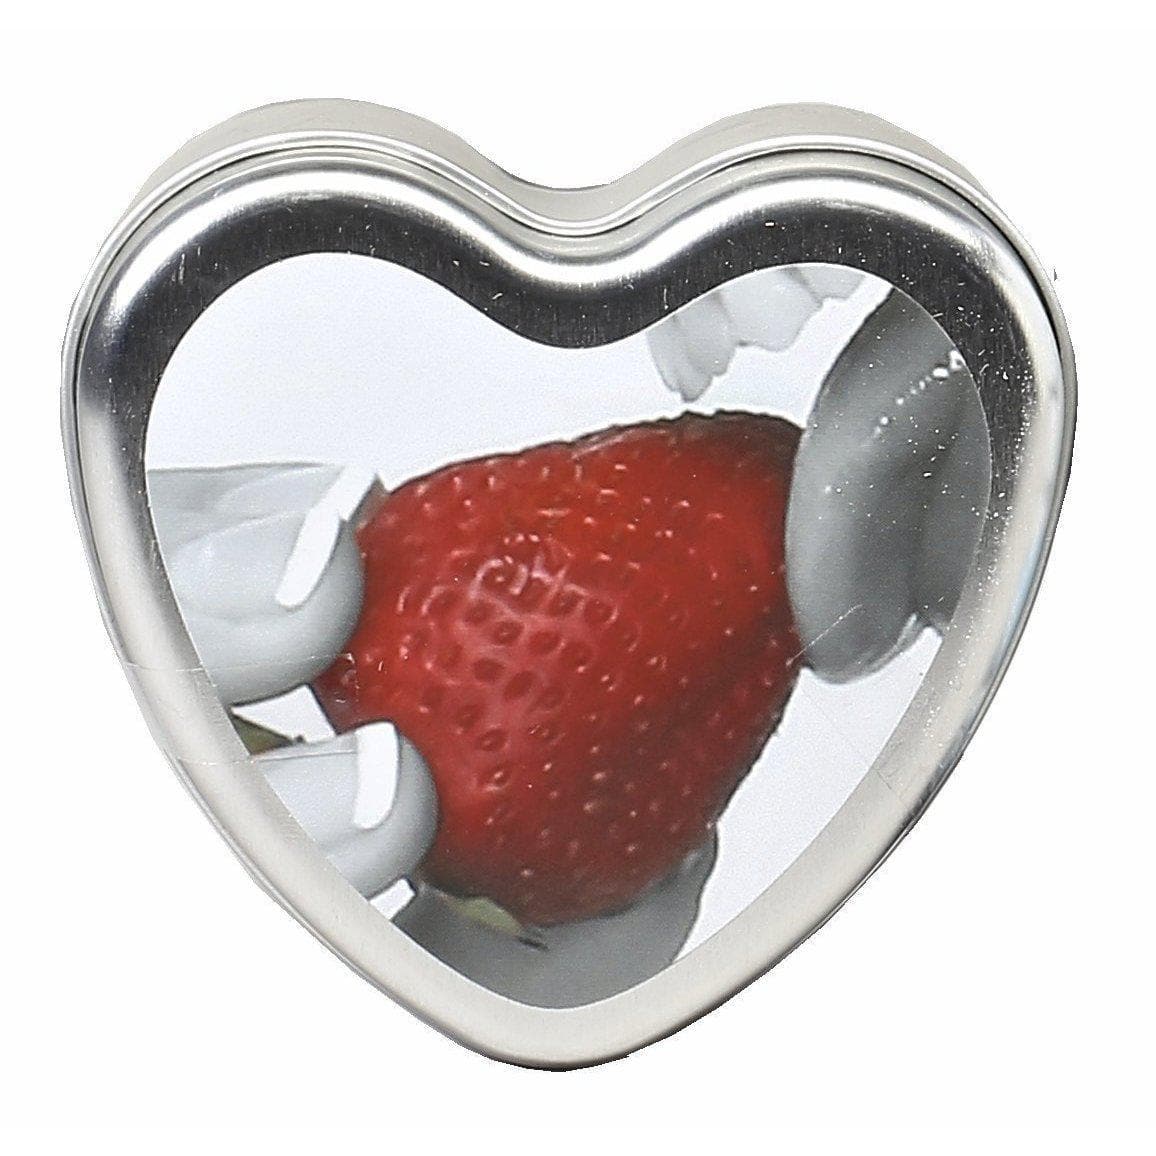 Earthly Body Heart-Shaped Hemp Seed Edible Massage Candle Strawberry 4 Oz - Romantic Blessings